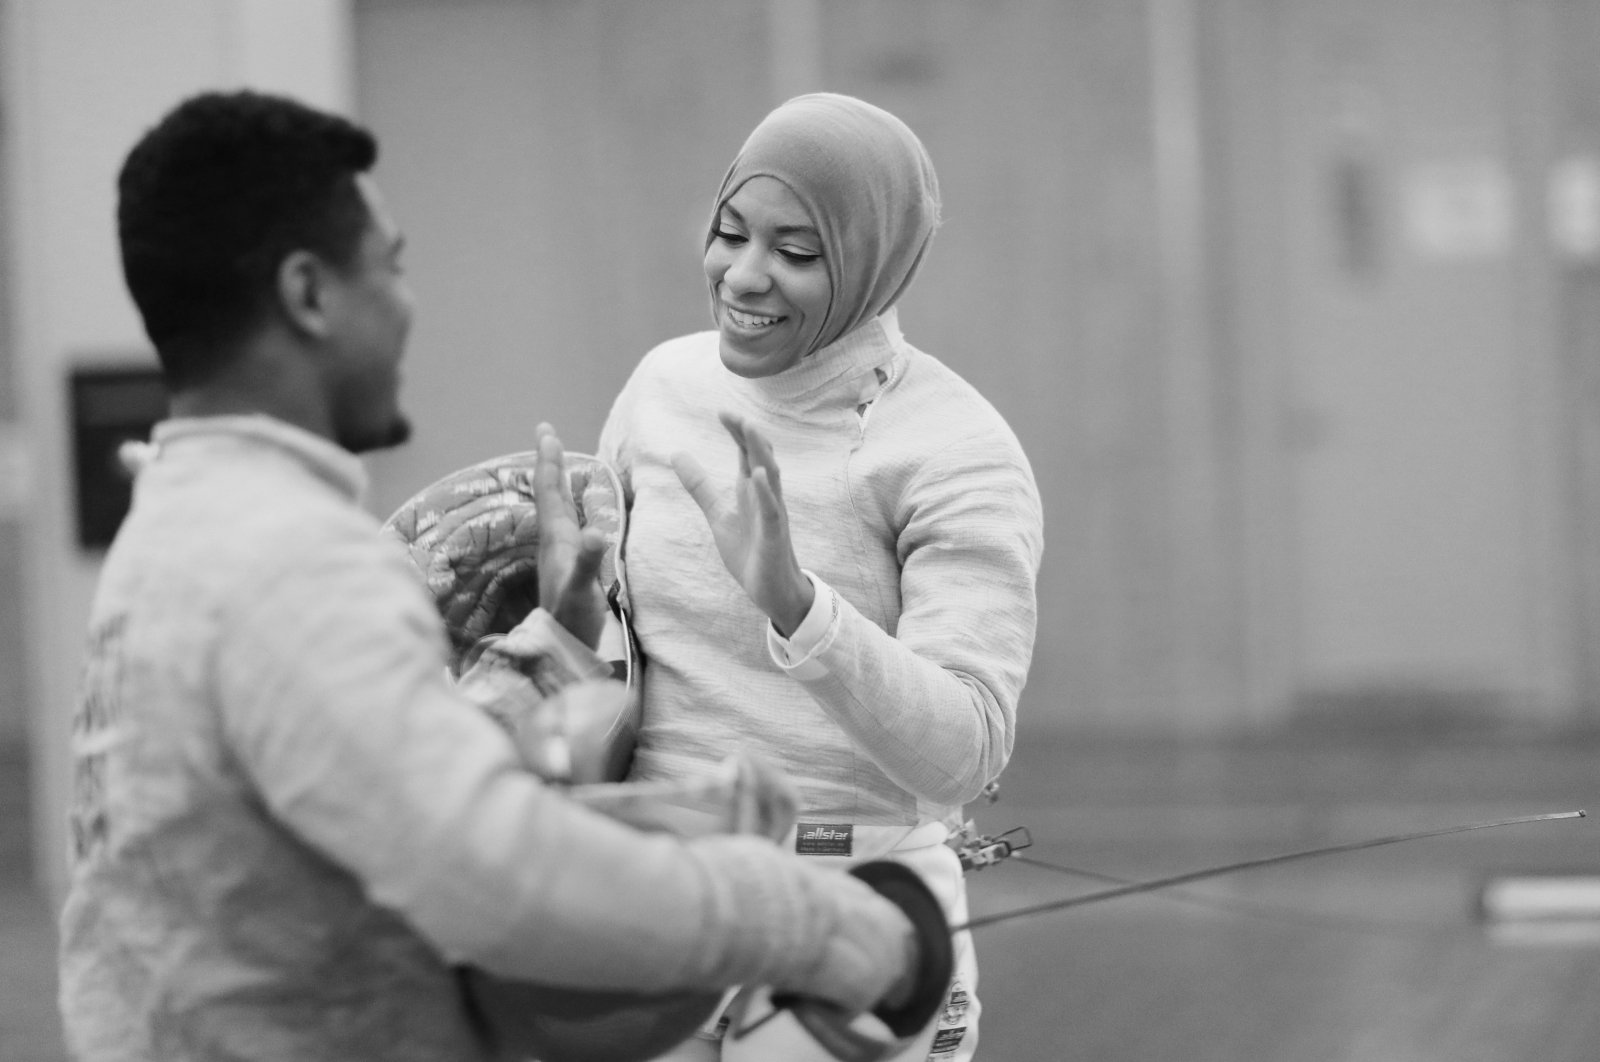 American Olympic fencer Ibtihaj Muhammad (right) shakes hands with Zaheer Booth after a training session at the Fencers Club, New York City, US,  July 7, 2016. (Getty Images Photo)